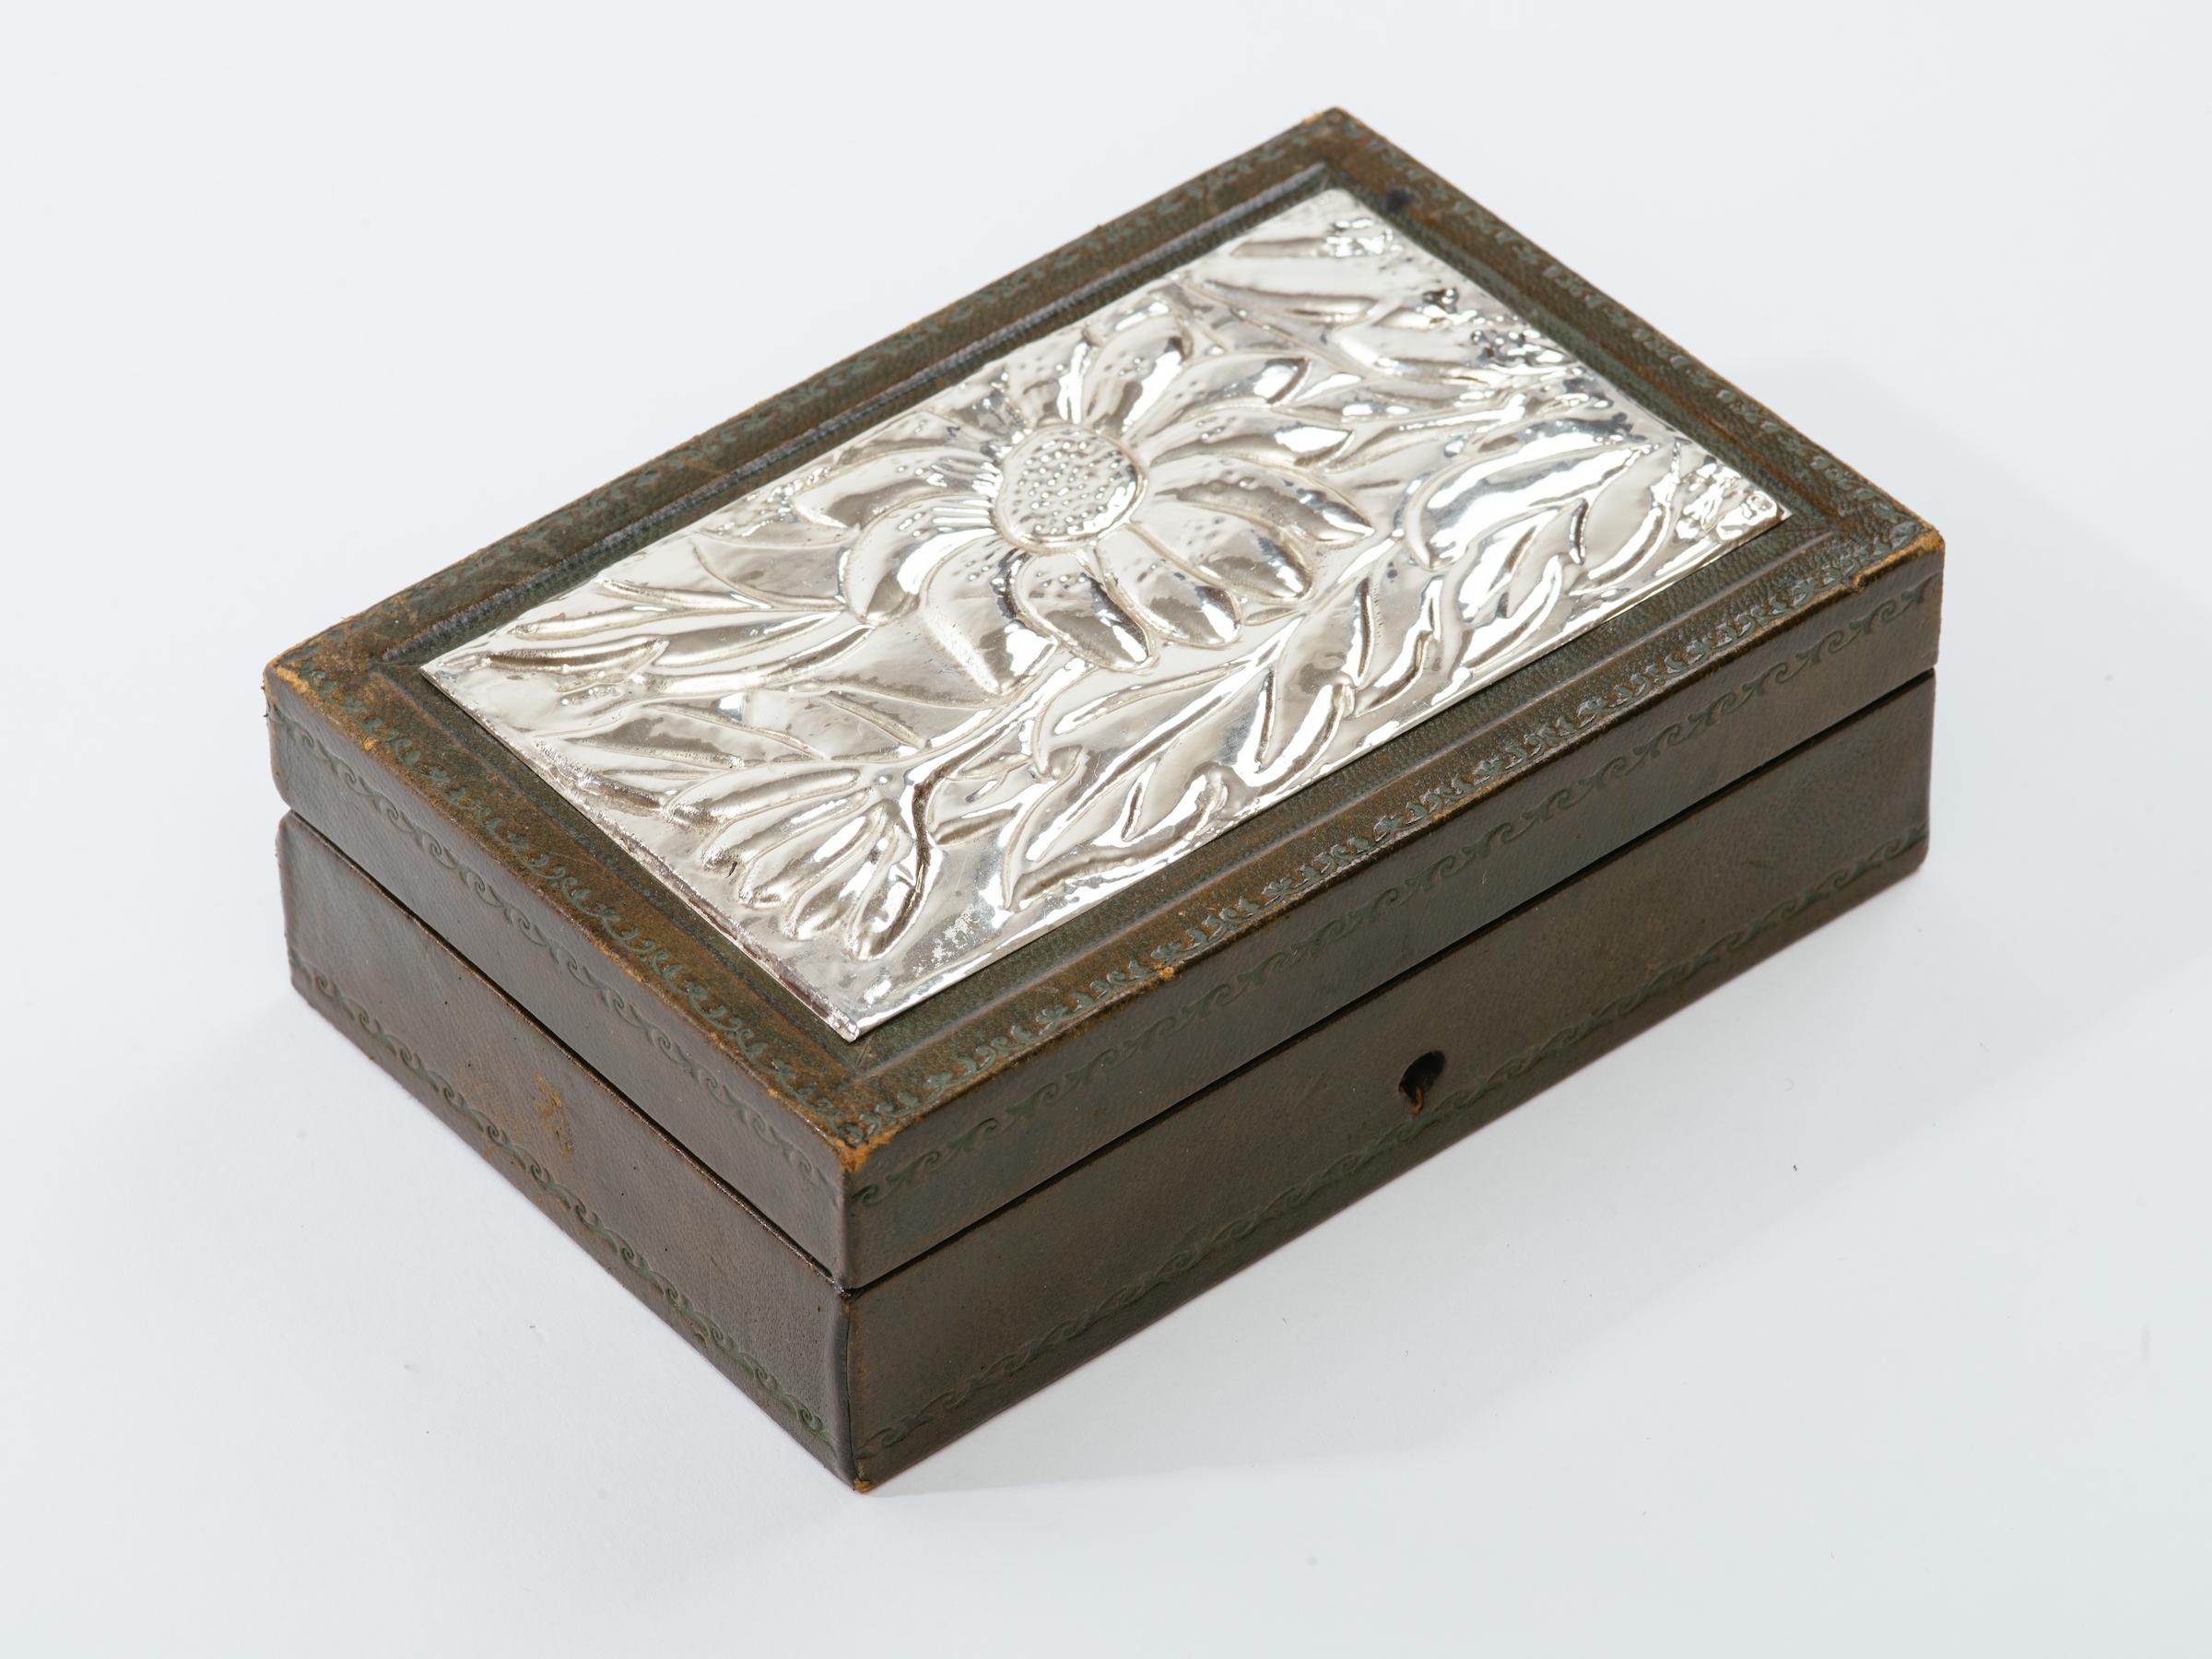 Repoussé Italian Leather and Silver Repousse Jewelery Box